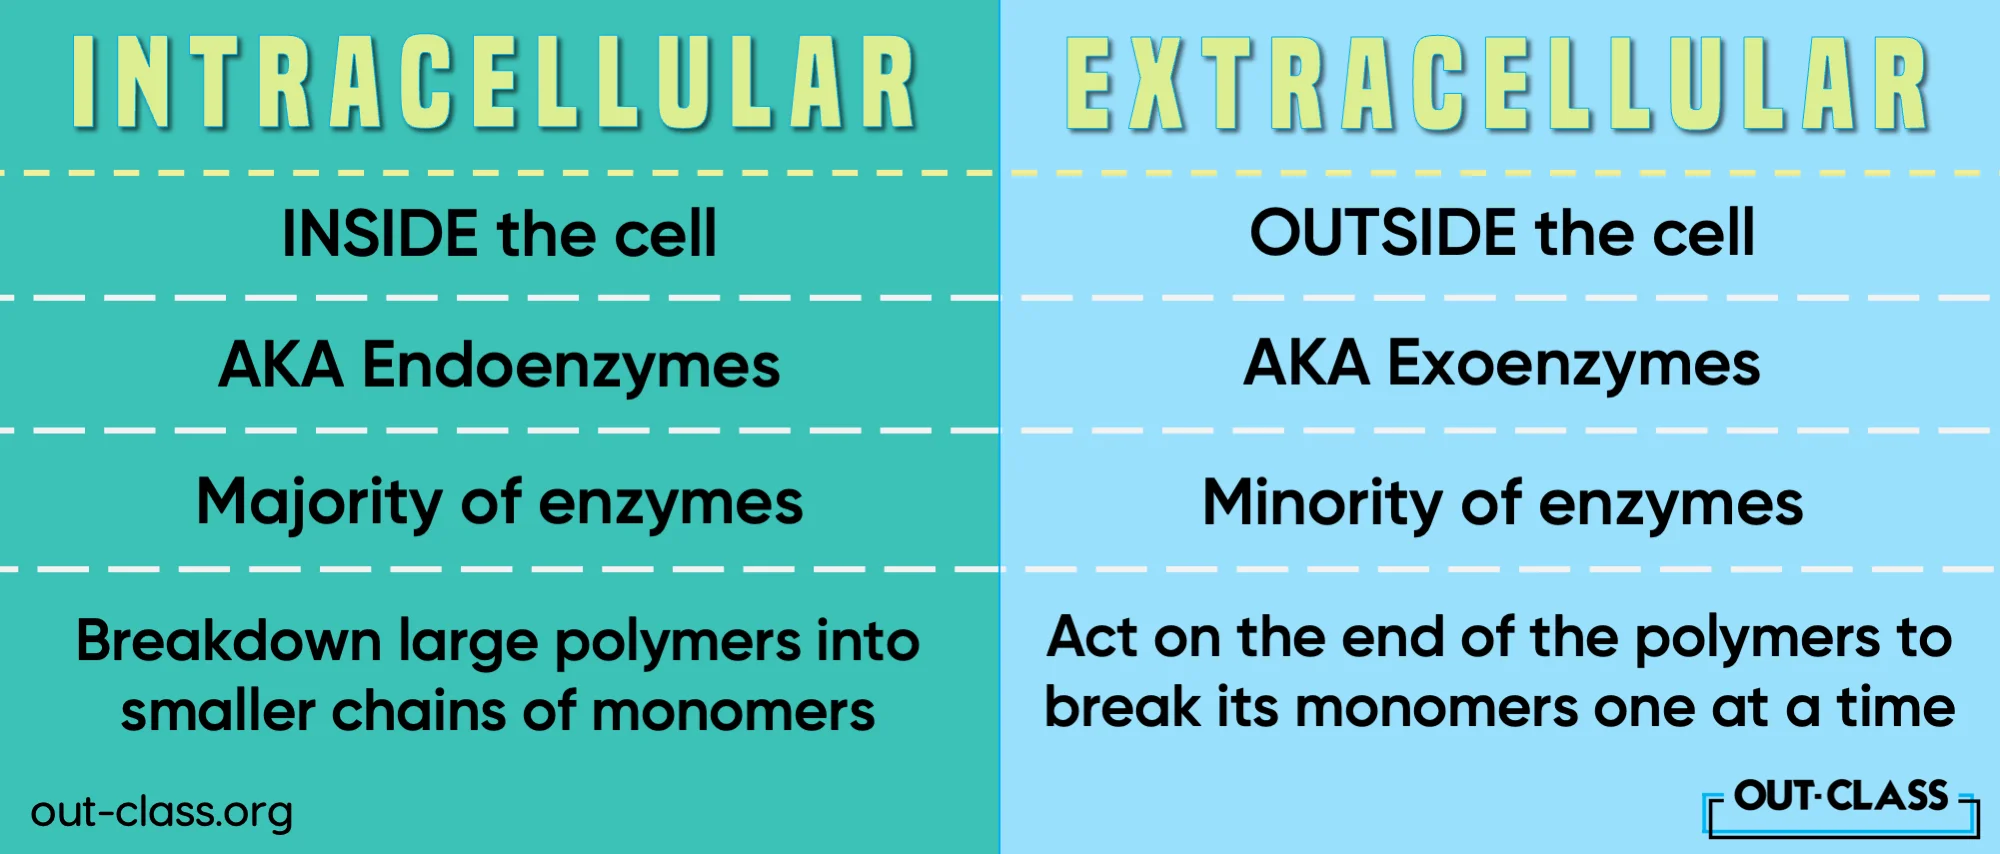 It shows the difference between intracellular enzymes and extracellular enzymes in cellular biology. As well as provides intracellular enzymes and extracellular enzymes examples.